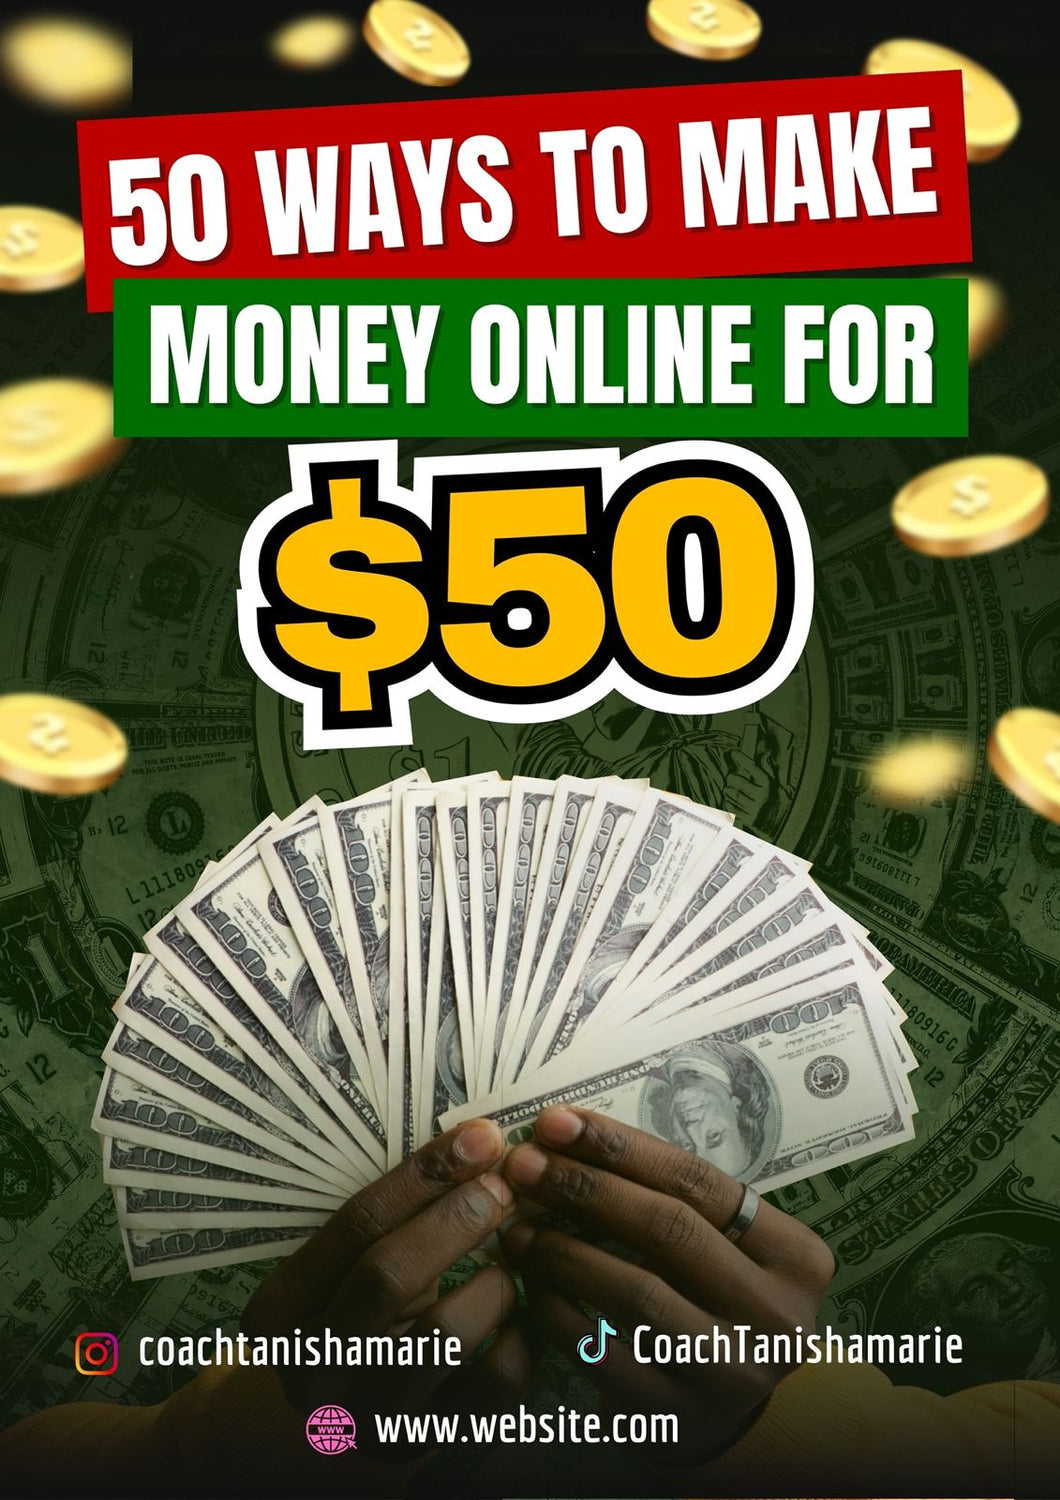 50 WAYS TO EARN MONEY FOR $50